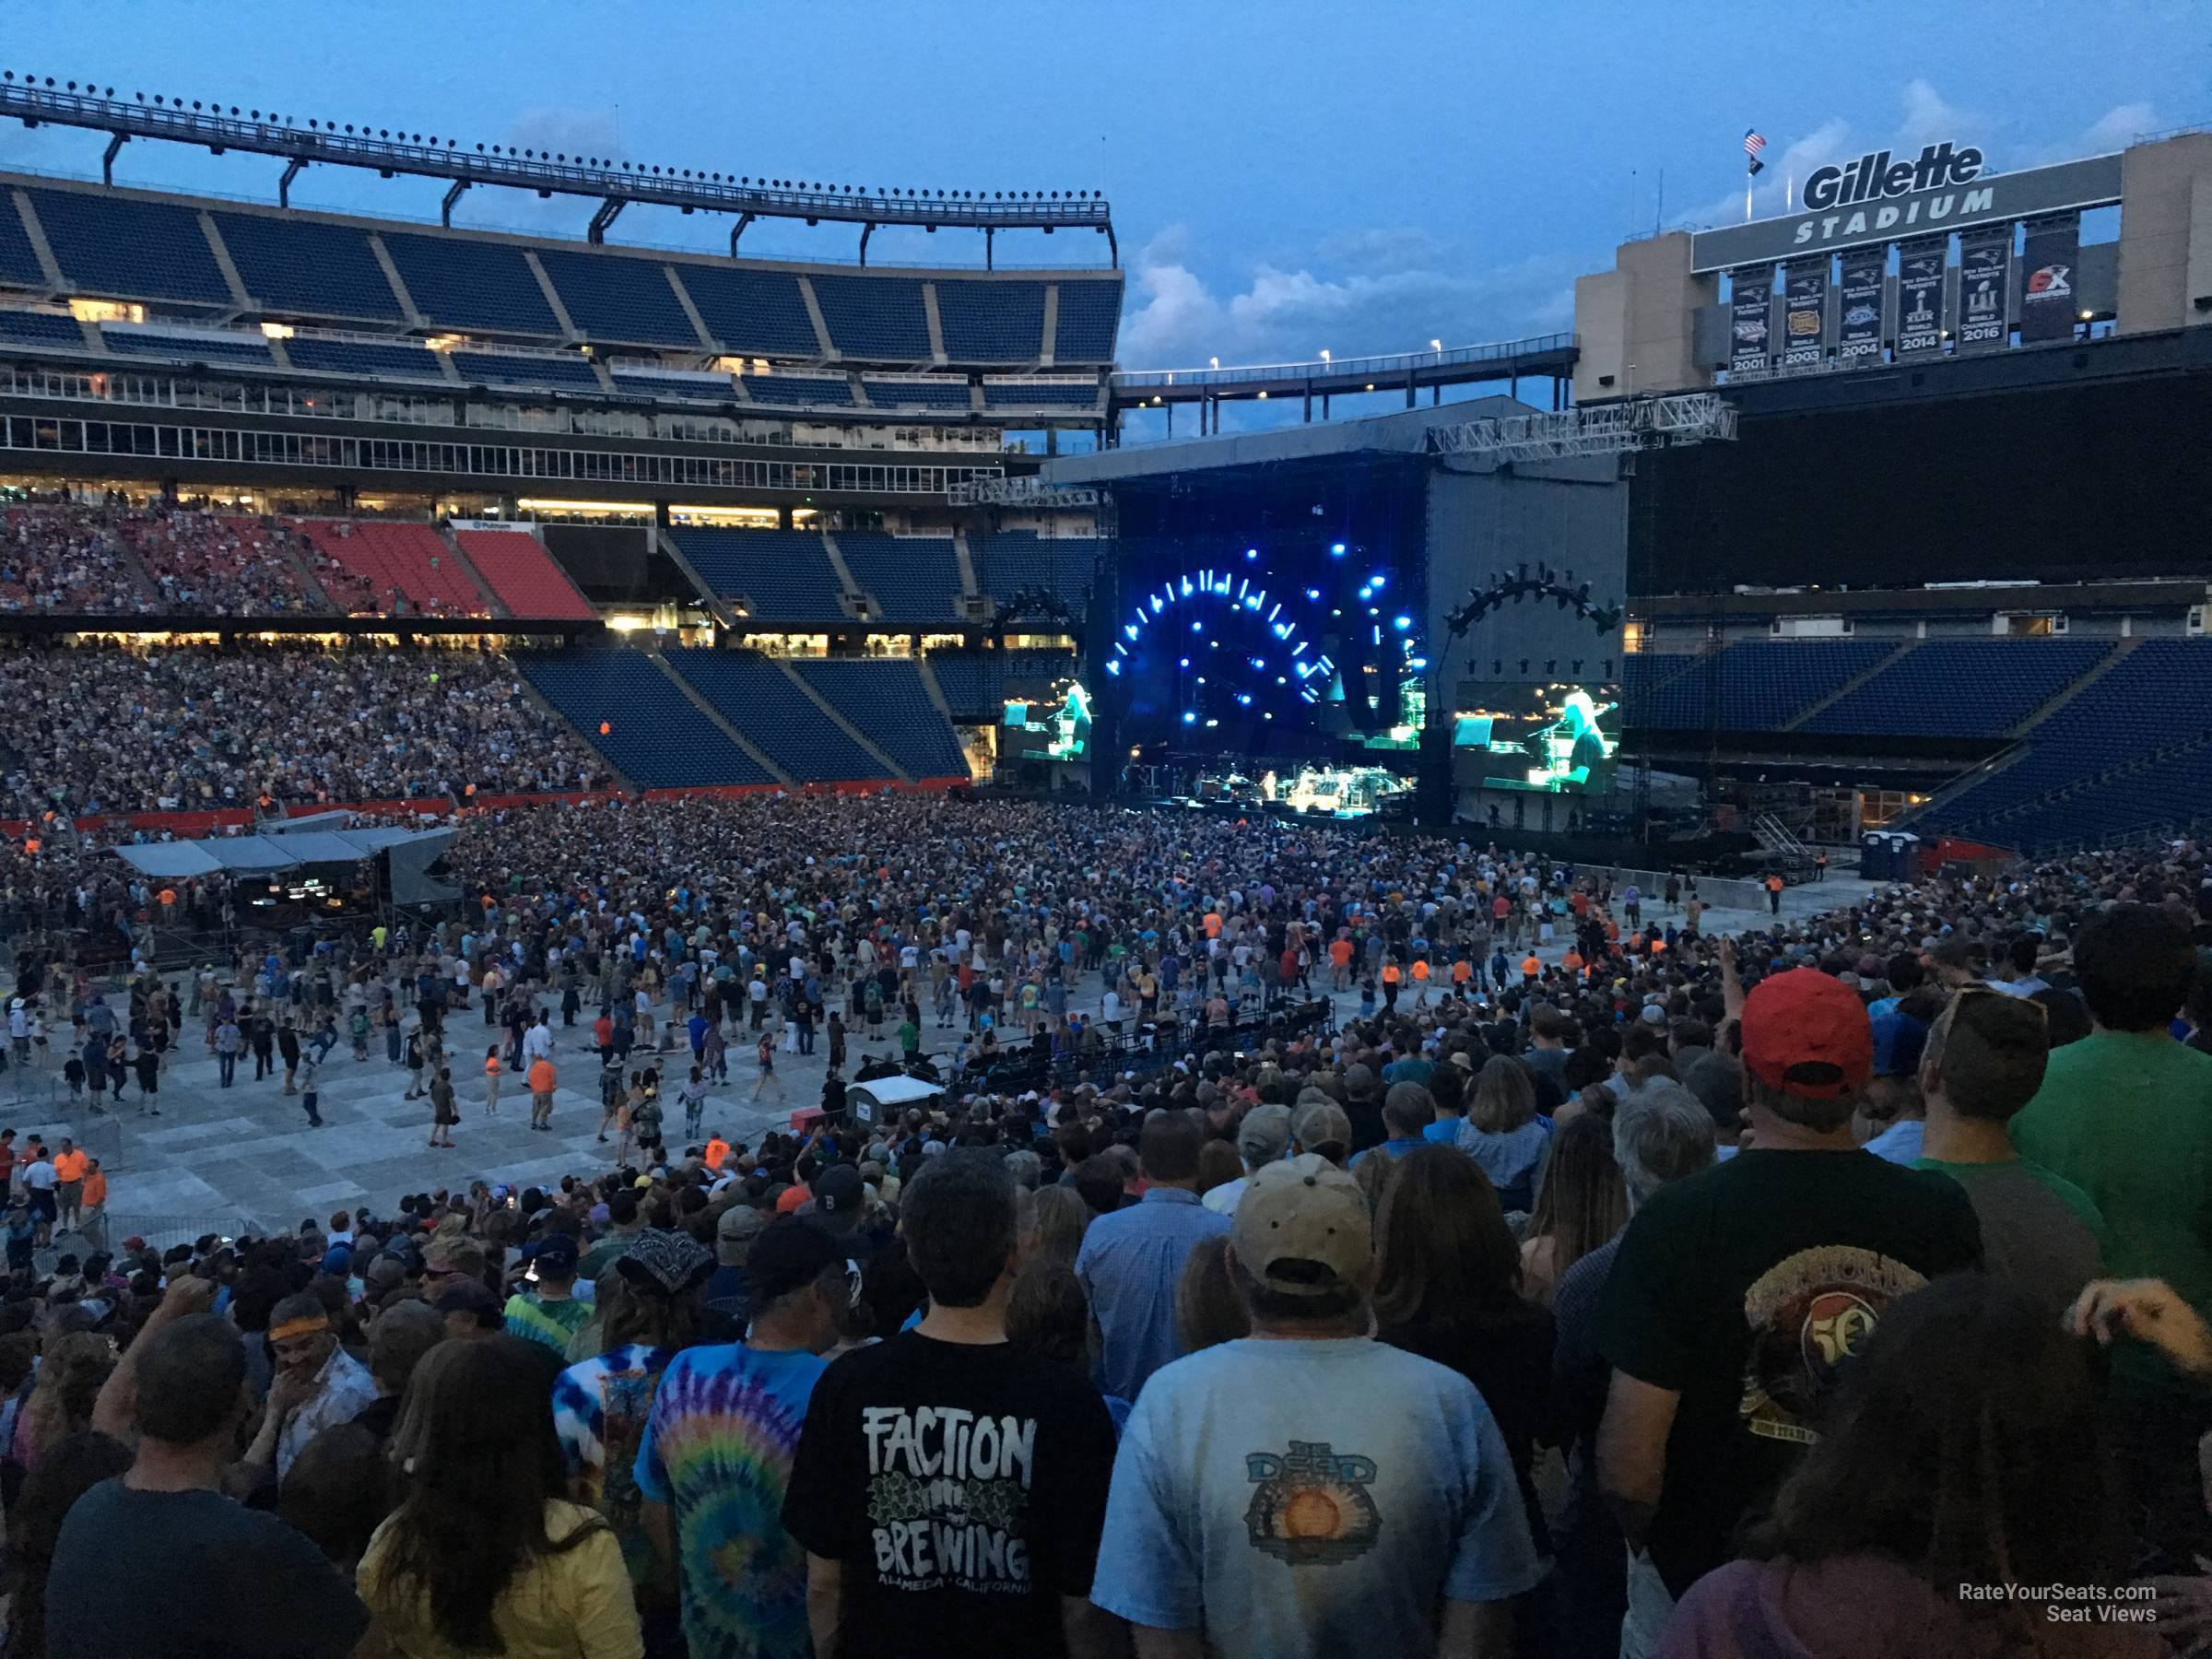 Section 133 at Gillette Stadium